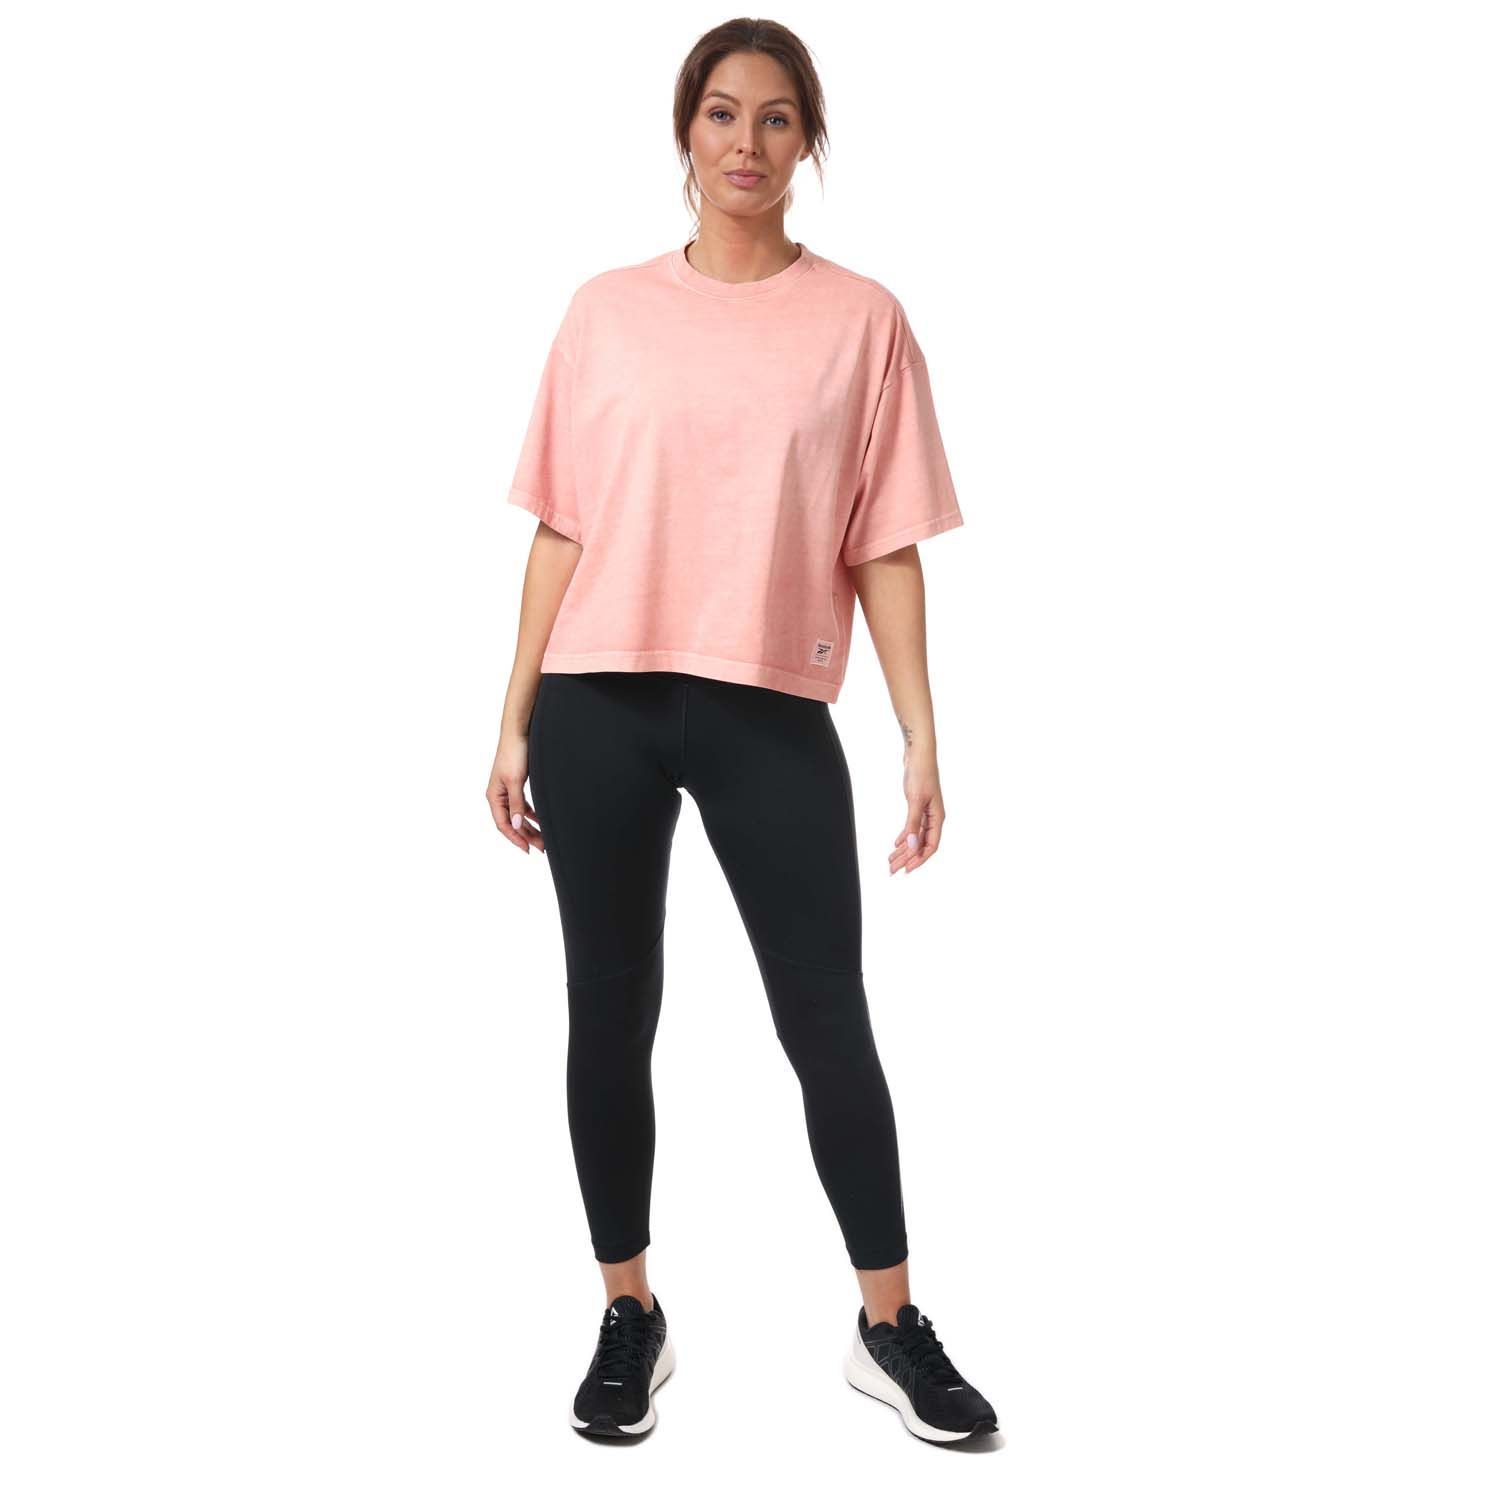 Womens Reebok Classics Natural Dye Cropped T-Shirt in berry.- Crew neck.- Short sleeves.- Drop shoulder.- Heavyweight feel.- Tonal embroidered logo.- Relaxed fit.- Main material: 100% Organic Cotton. Rib Part: 95% Organic Cotton  5% Elastane.- Ref:H09019